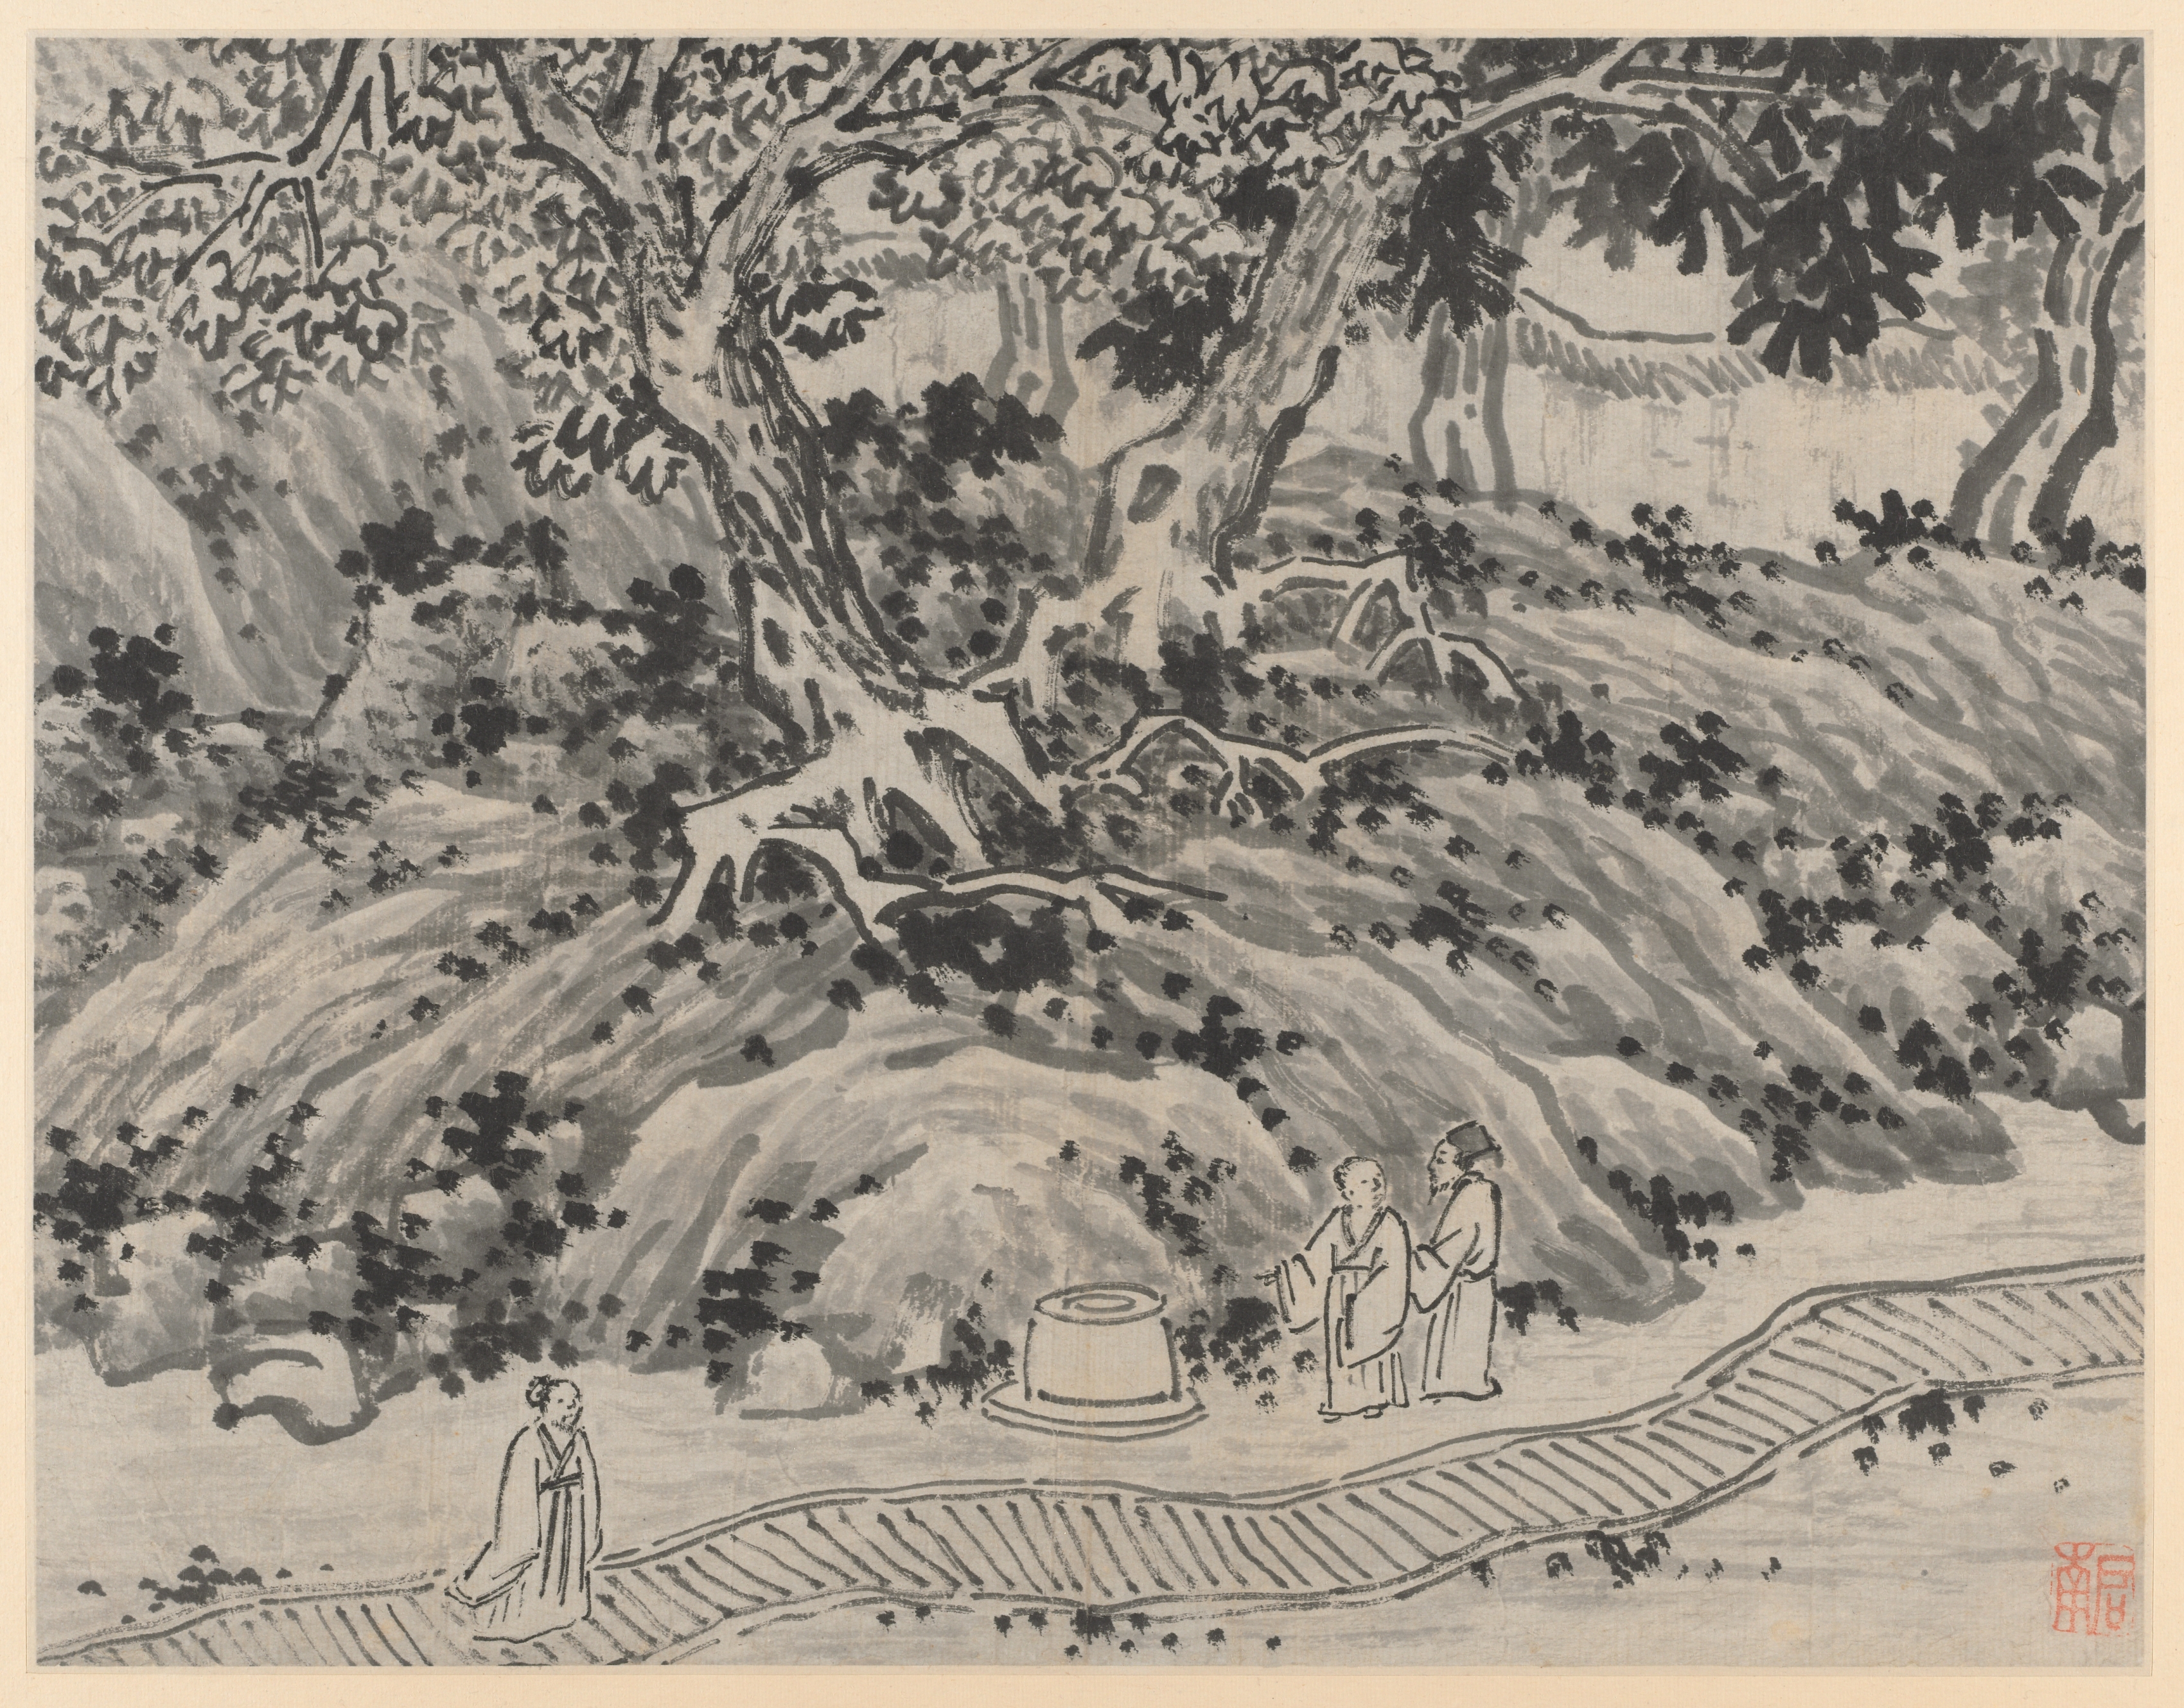 The Fool's Spring, from Twelve Views of Tiger Hill, Suzhou